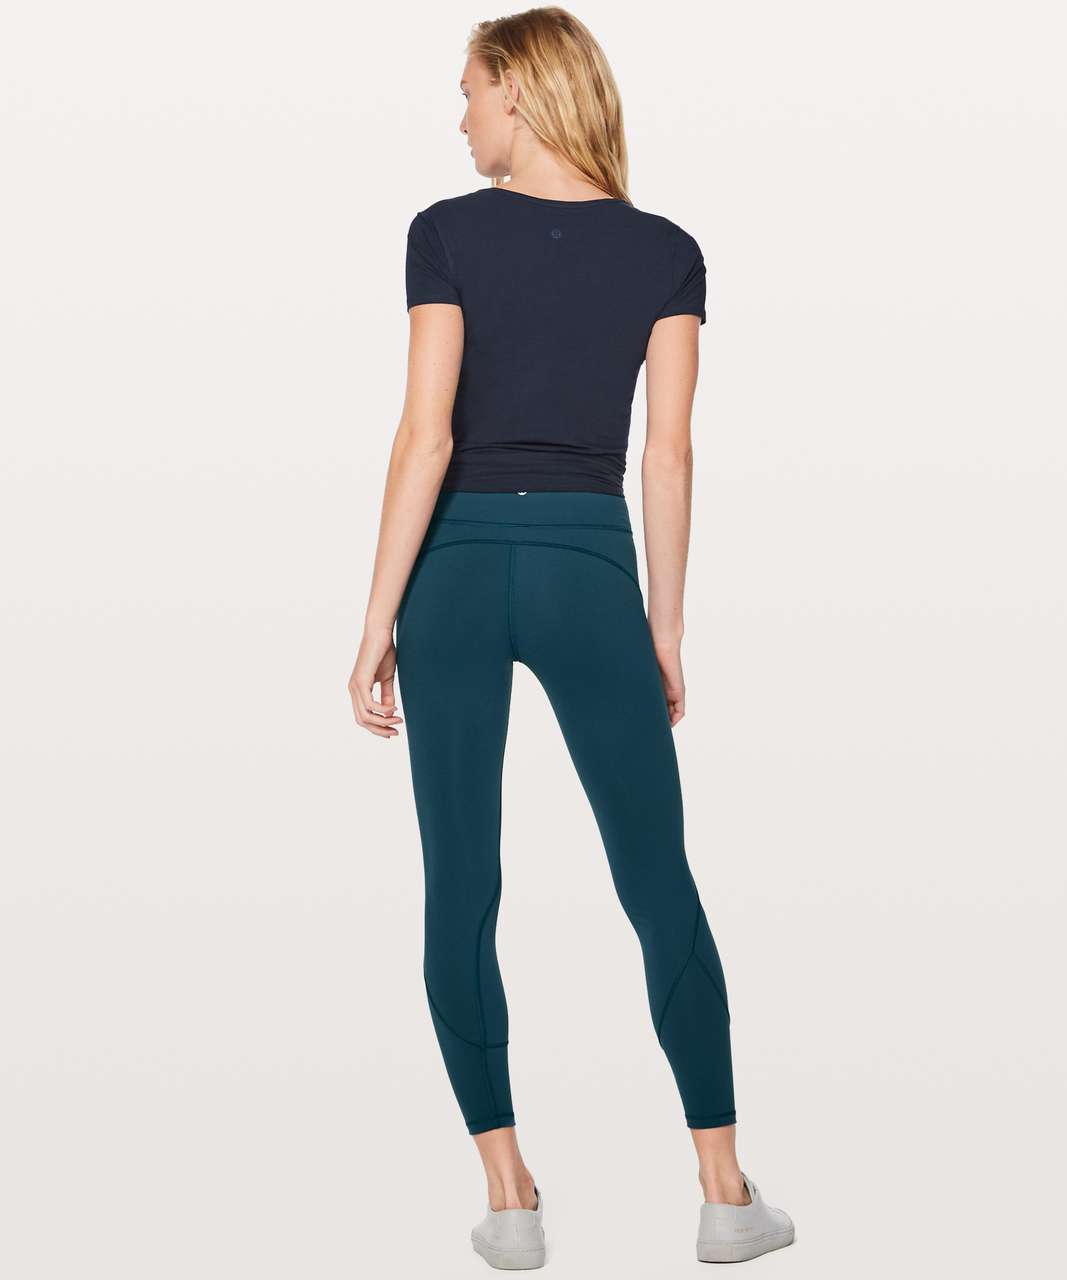 NWD - Lululemon In Movement Tight 25 7/8 *Everlux Mystic Green | SIZE: 4